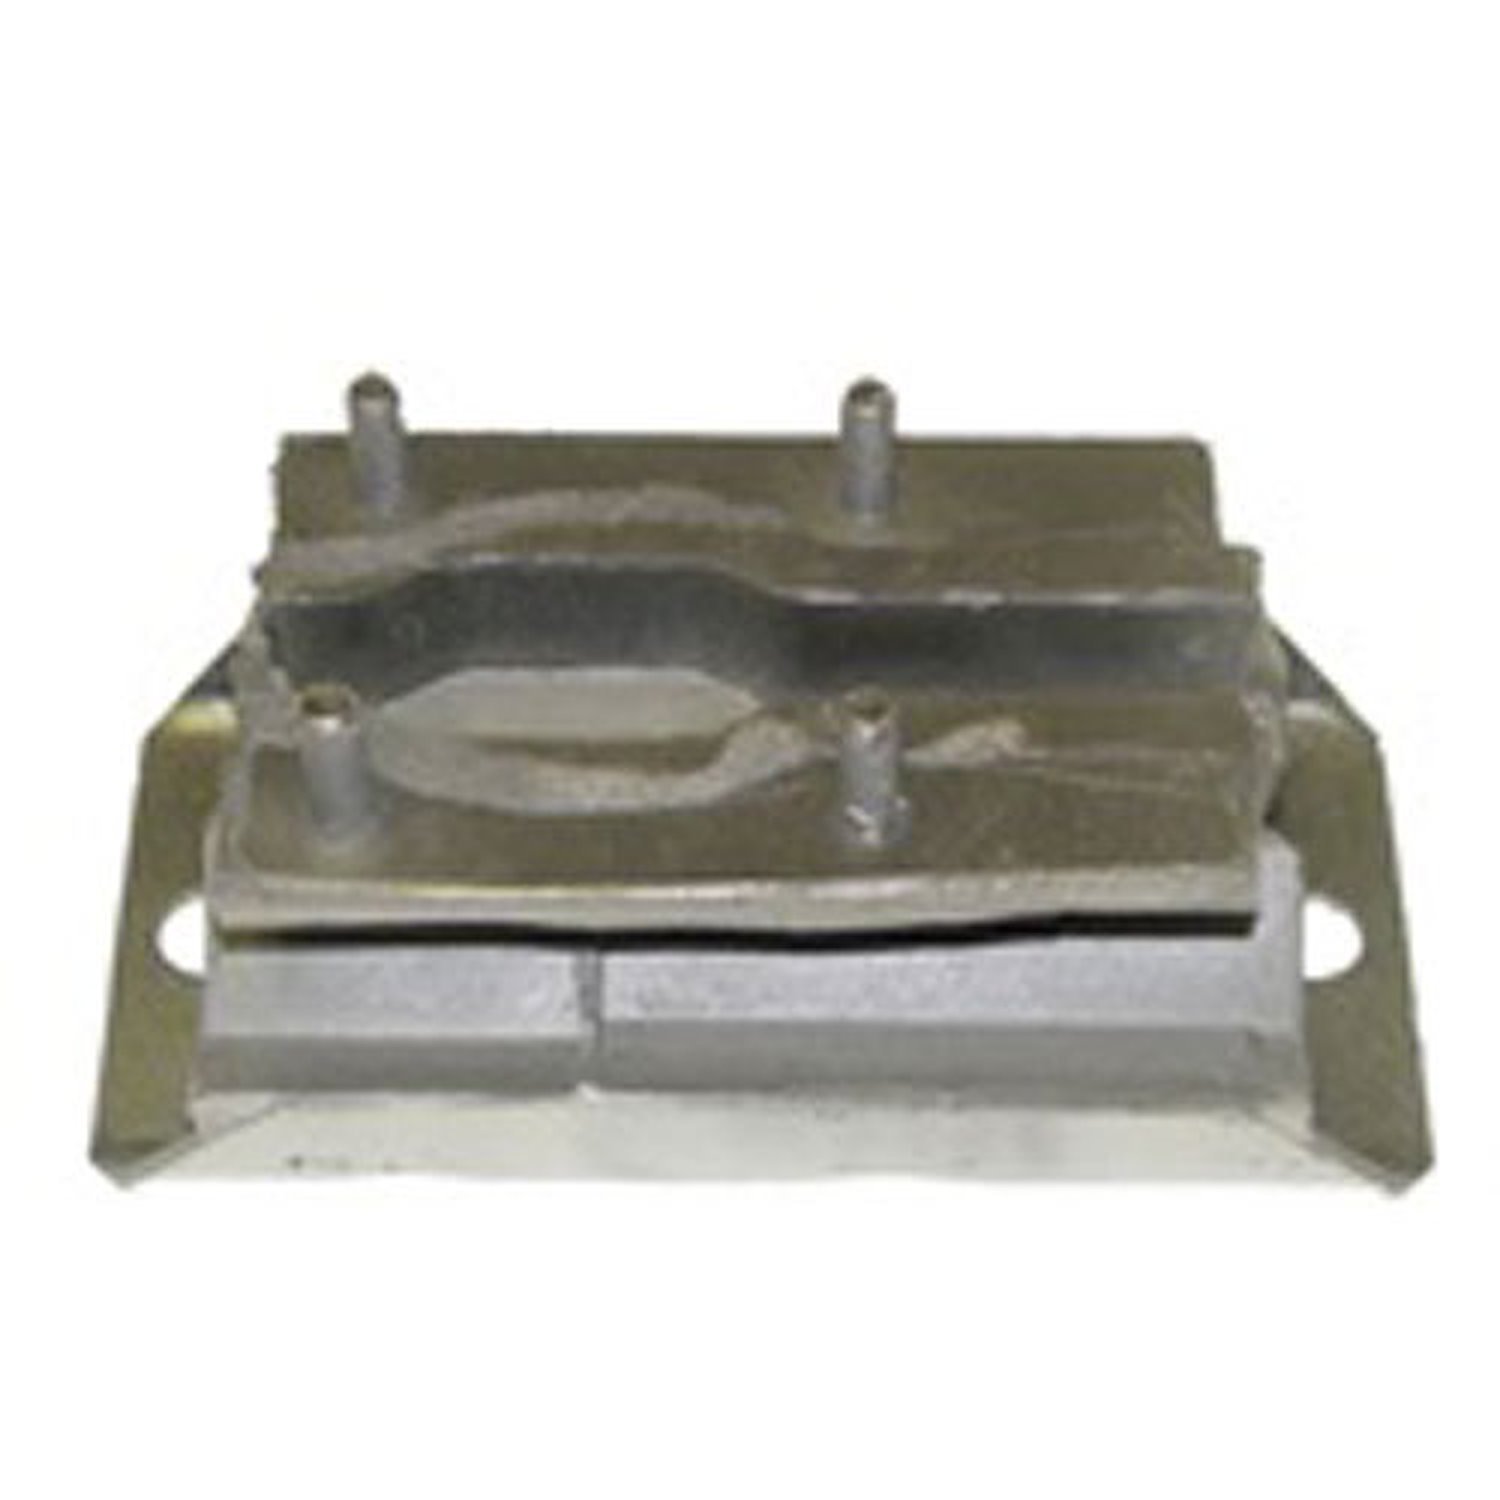 This automatic transmission mount from Omix-ADA fits 00-01